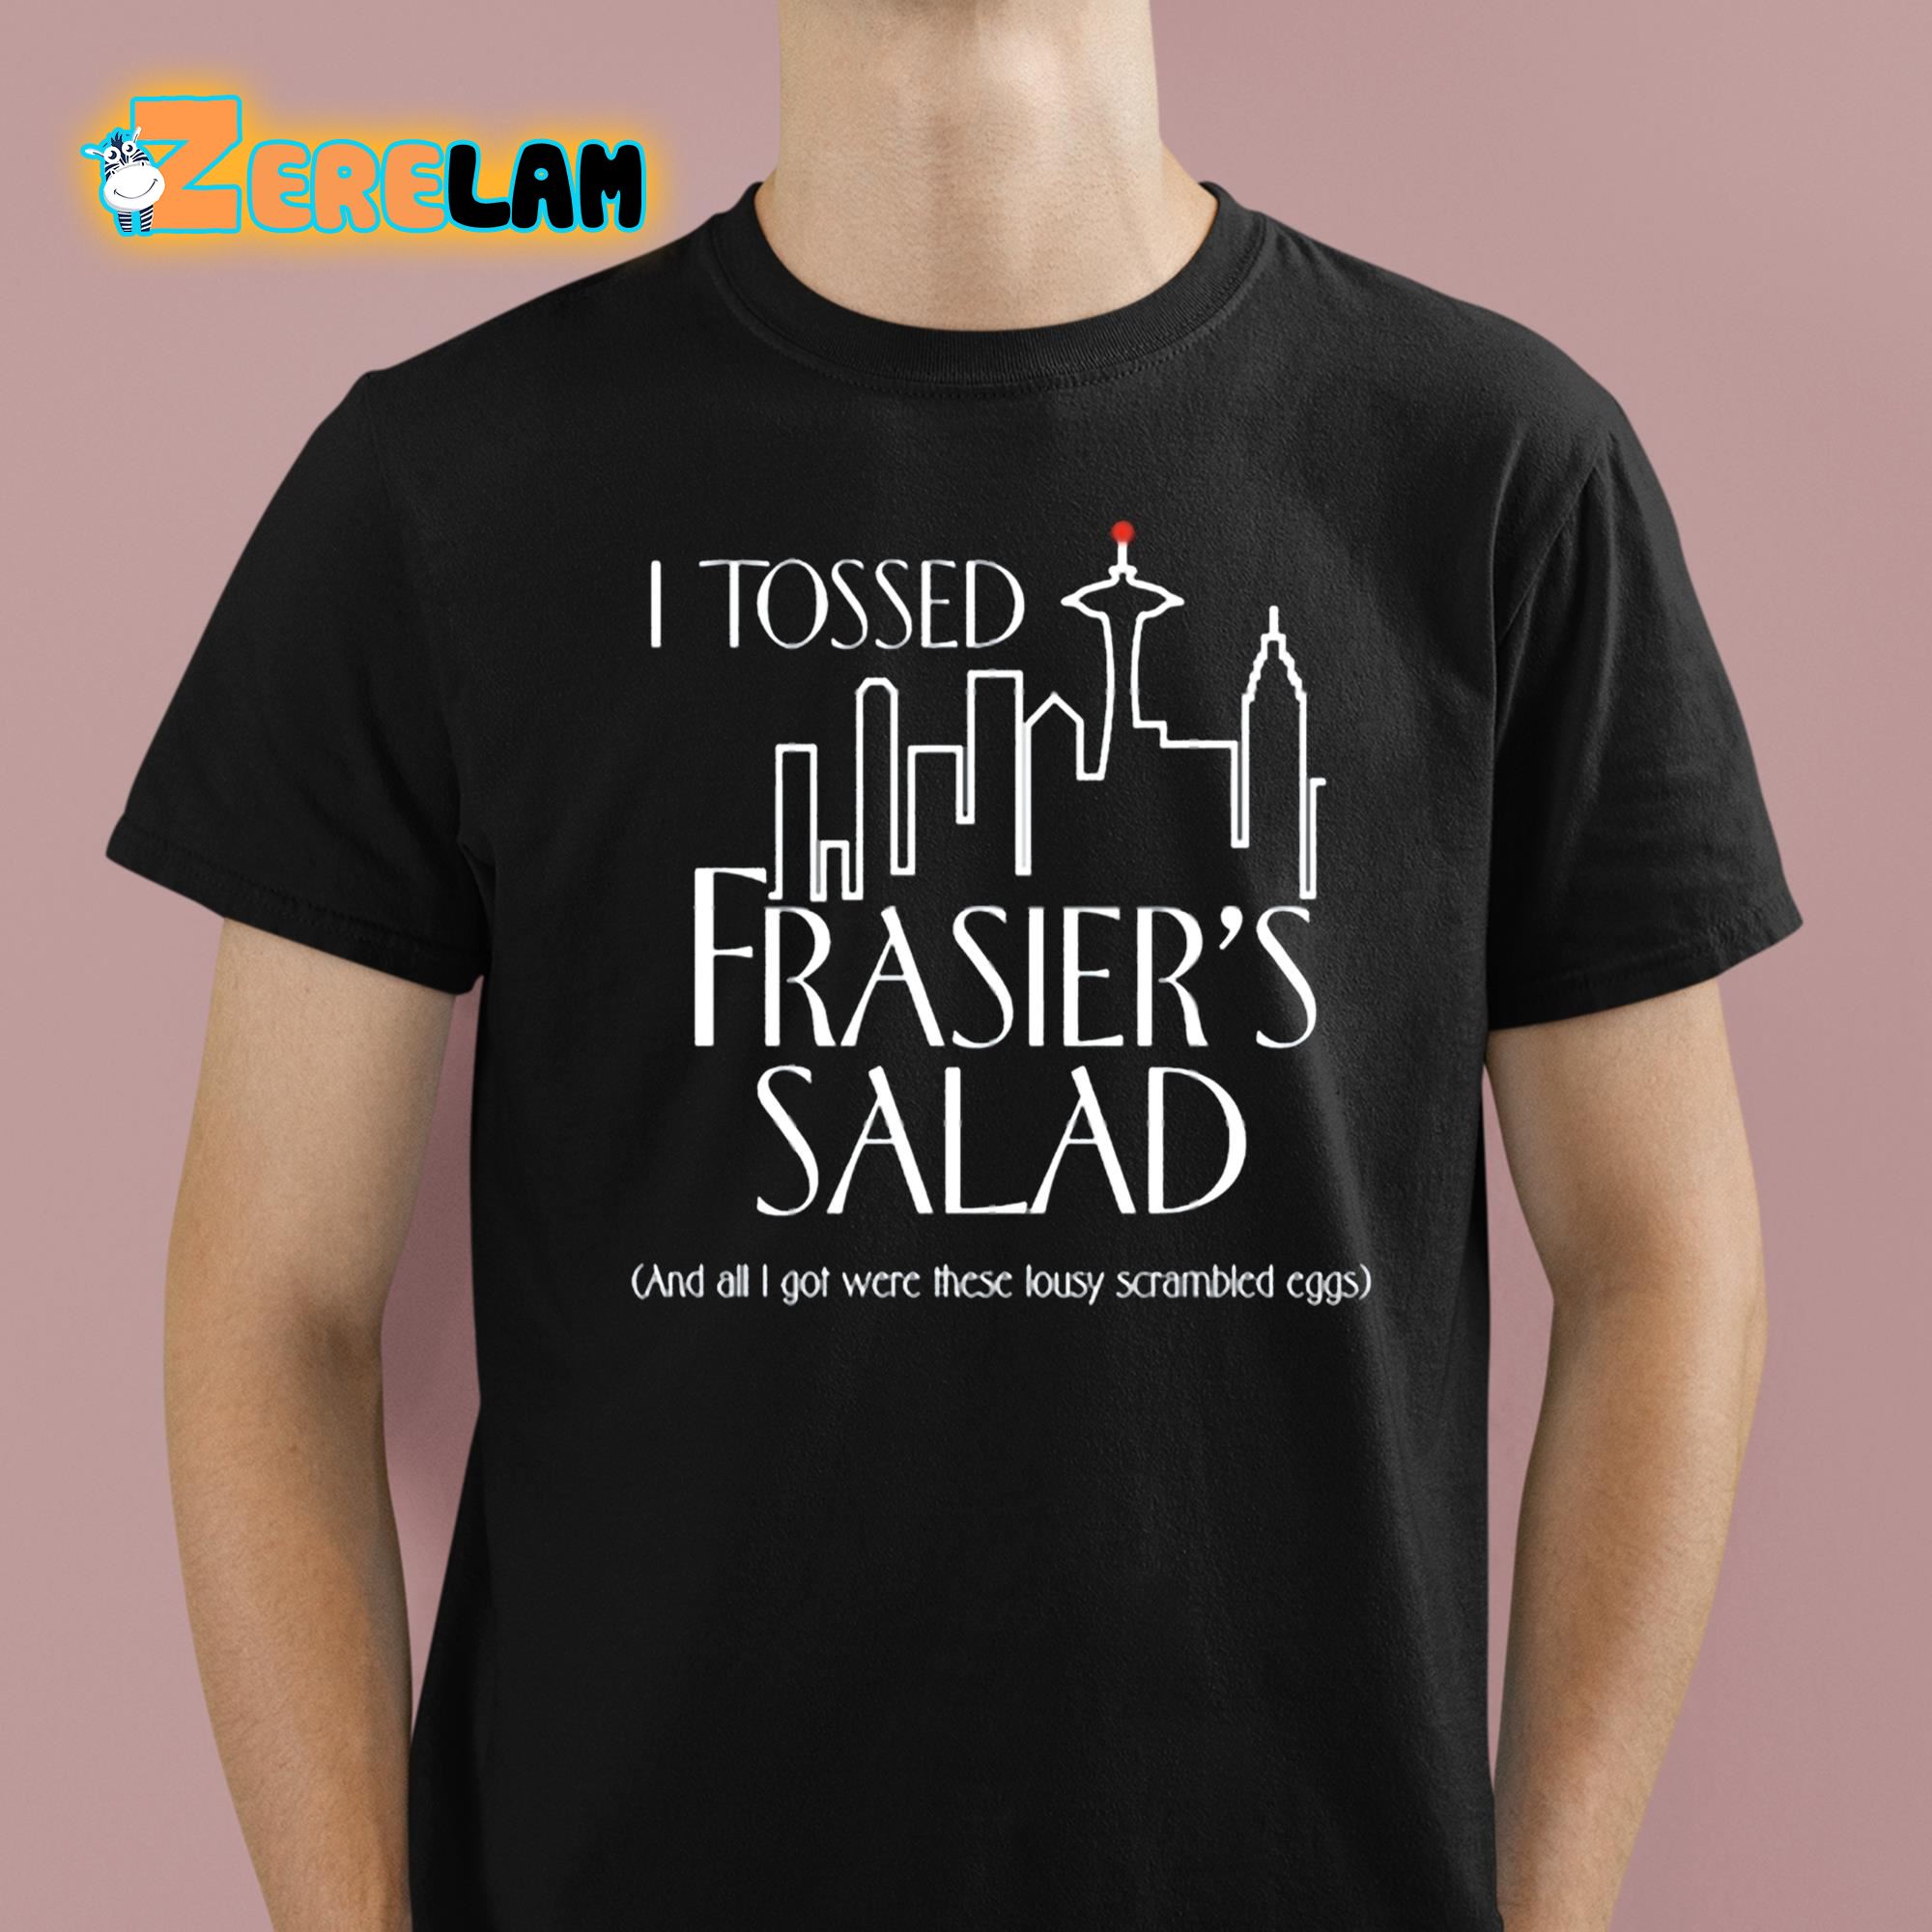 I Tossed Frasier's Salad And All I Got Were These Lousy Scrambled Eggs Shirt